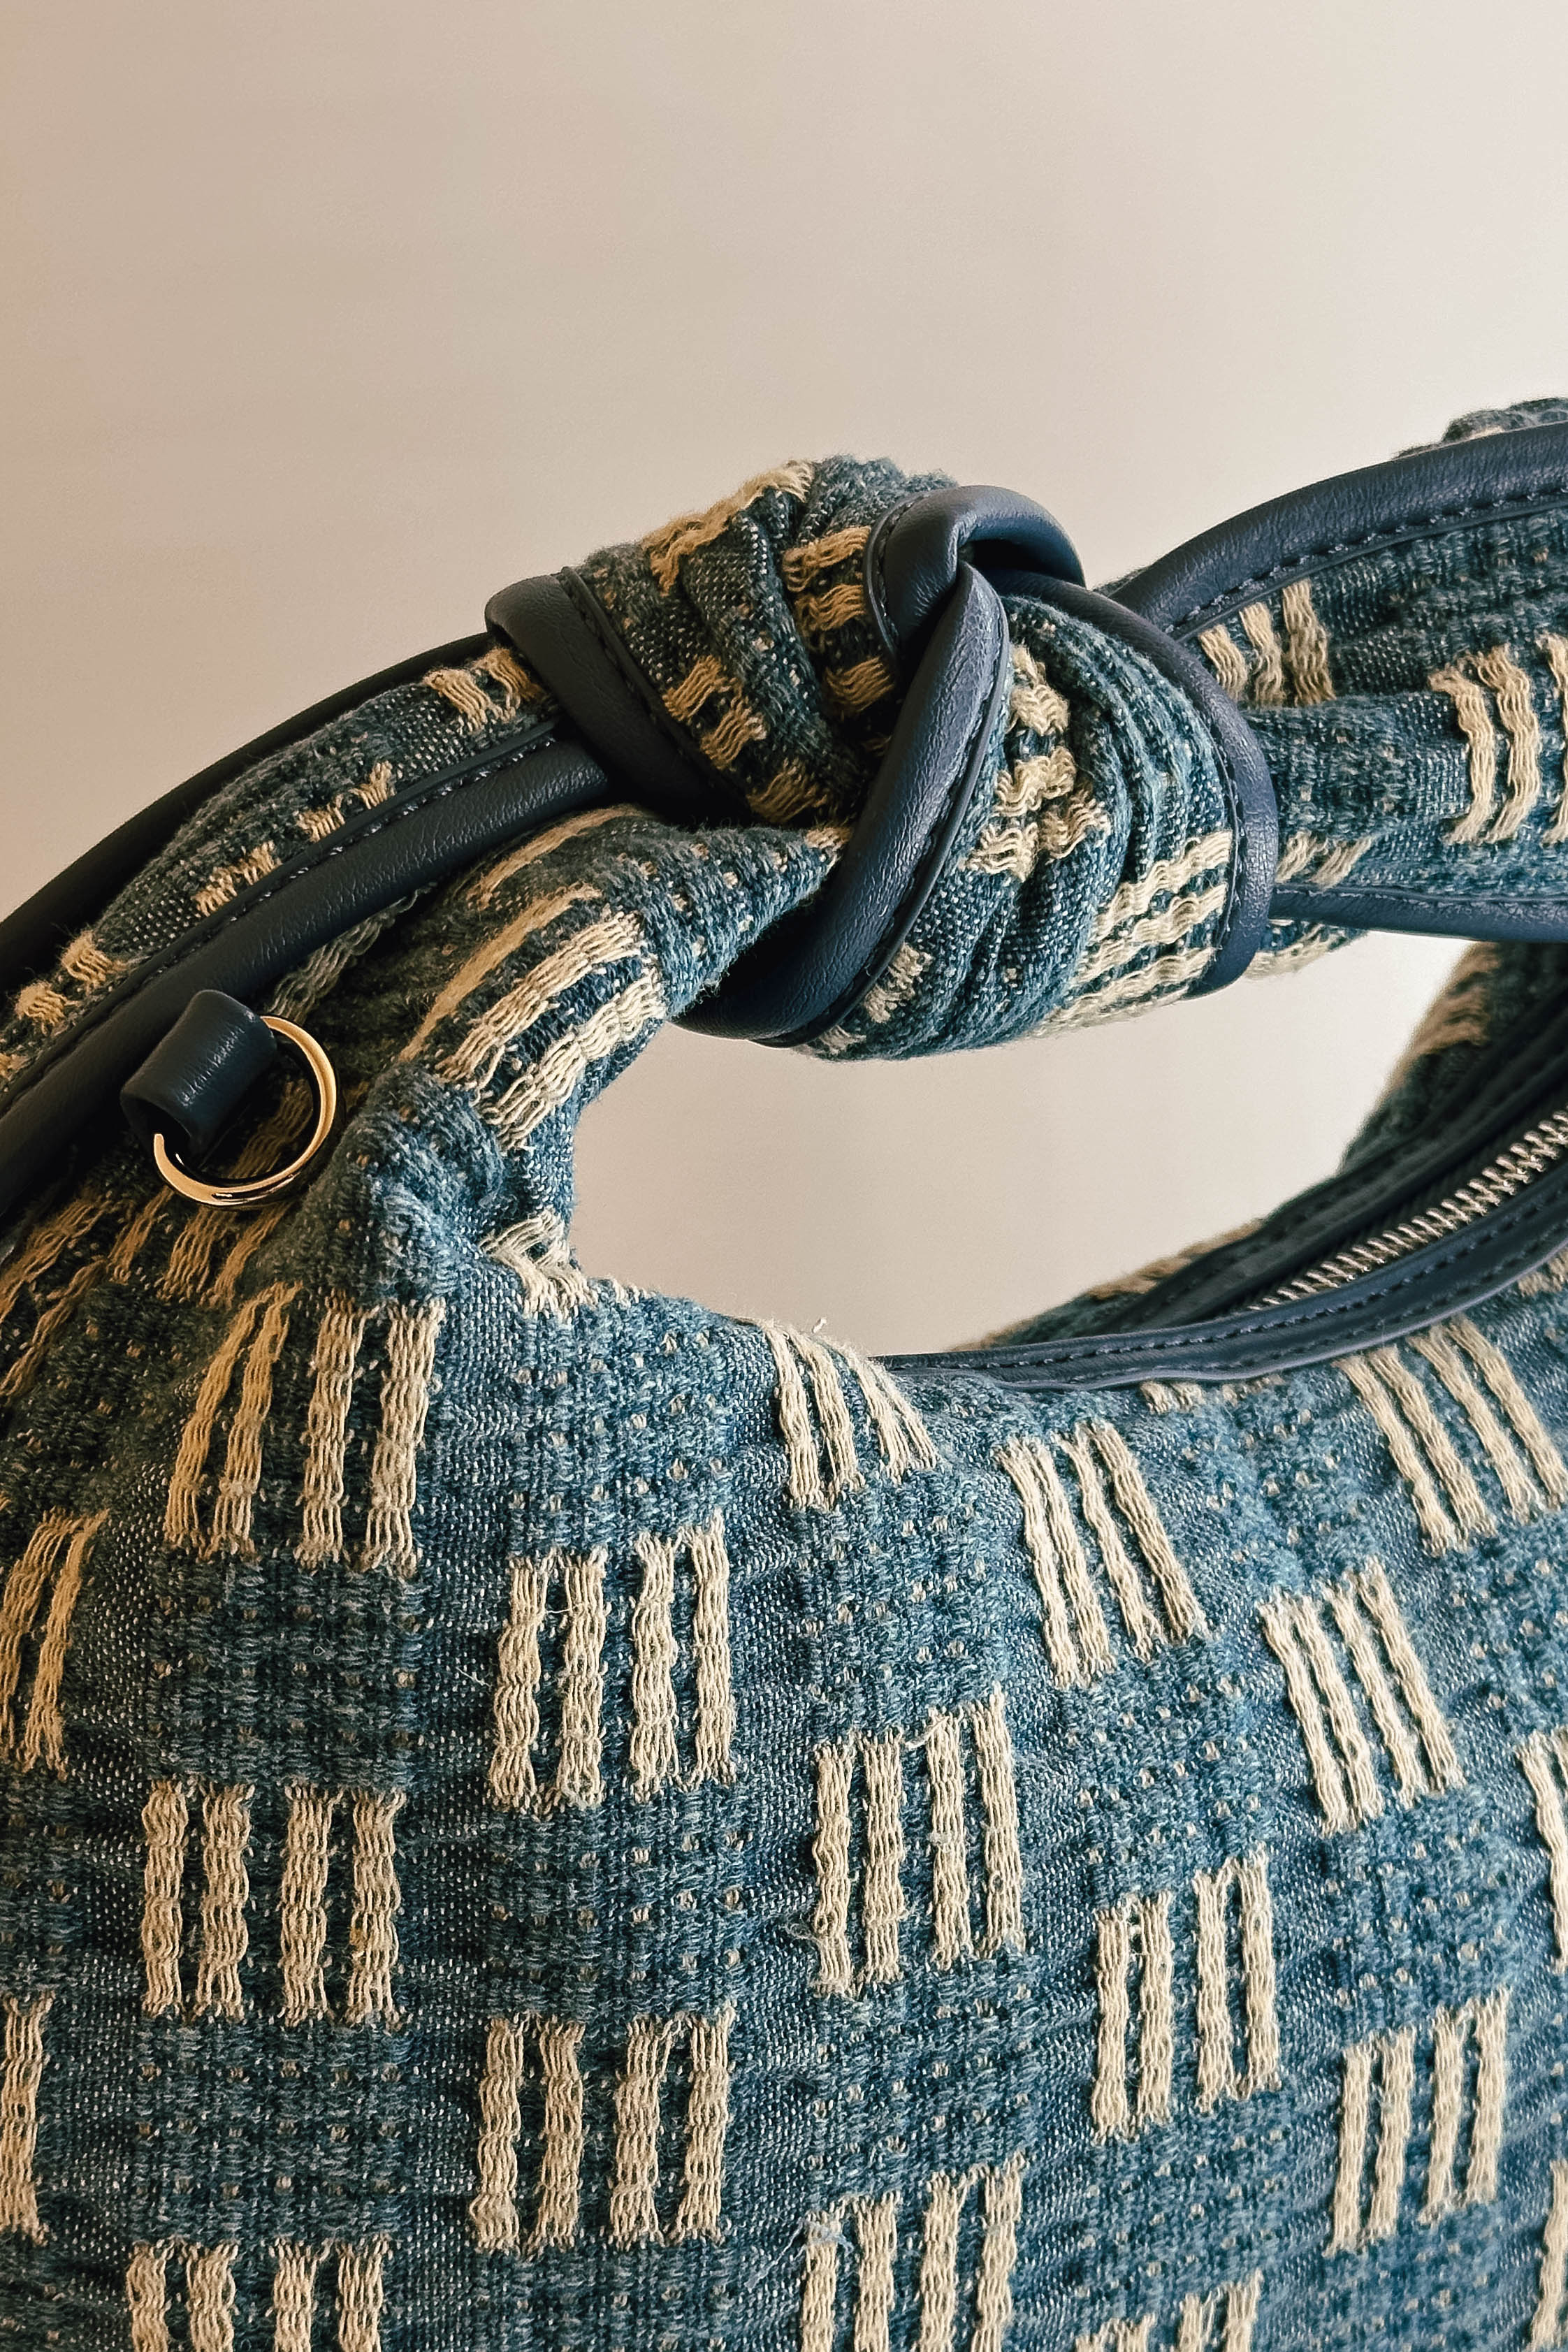 A close up handle view of The Miley Denim Knot Handbag. This features a medium wash denim and tan pattern with a knot handle. There is a zipper closure along with a pocket on the inside.